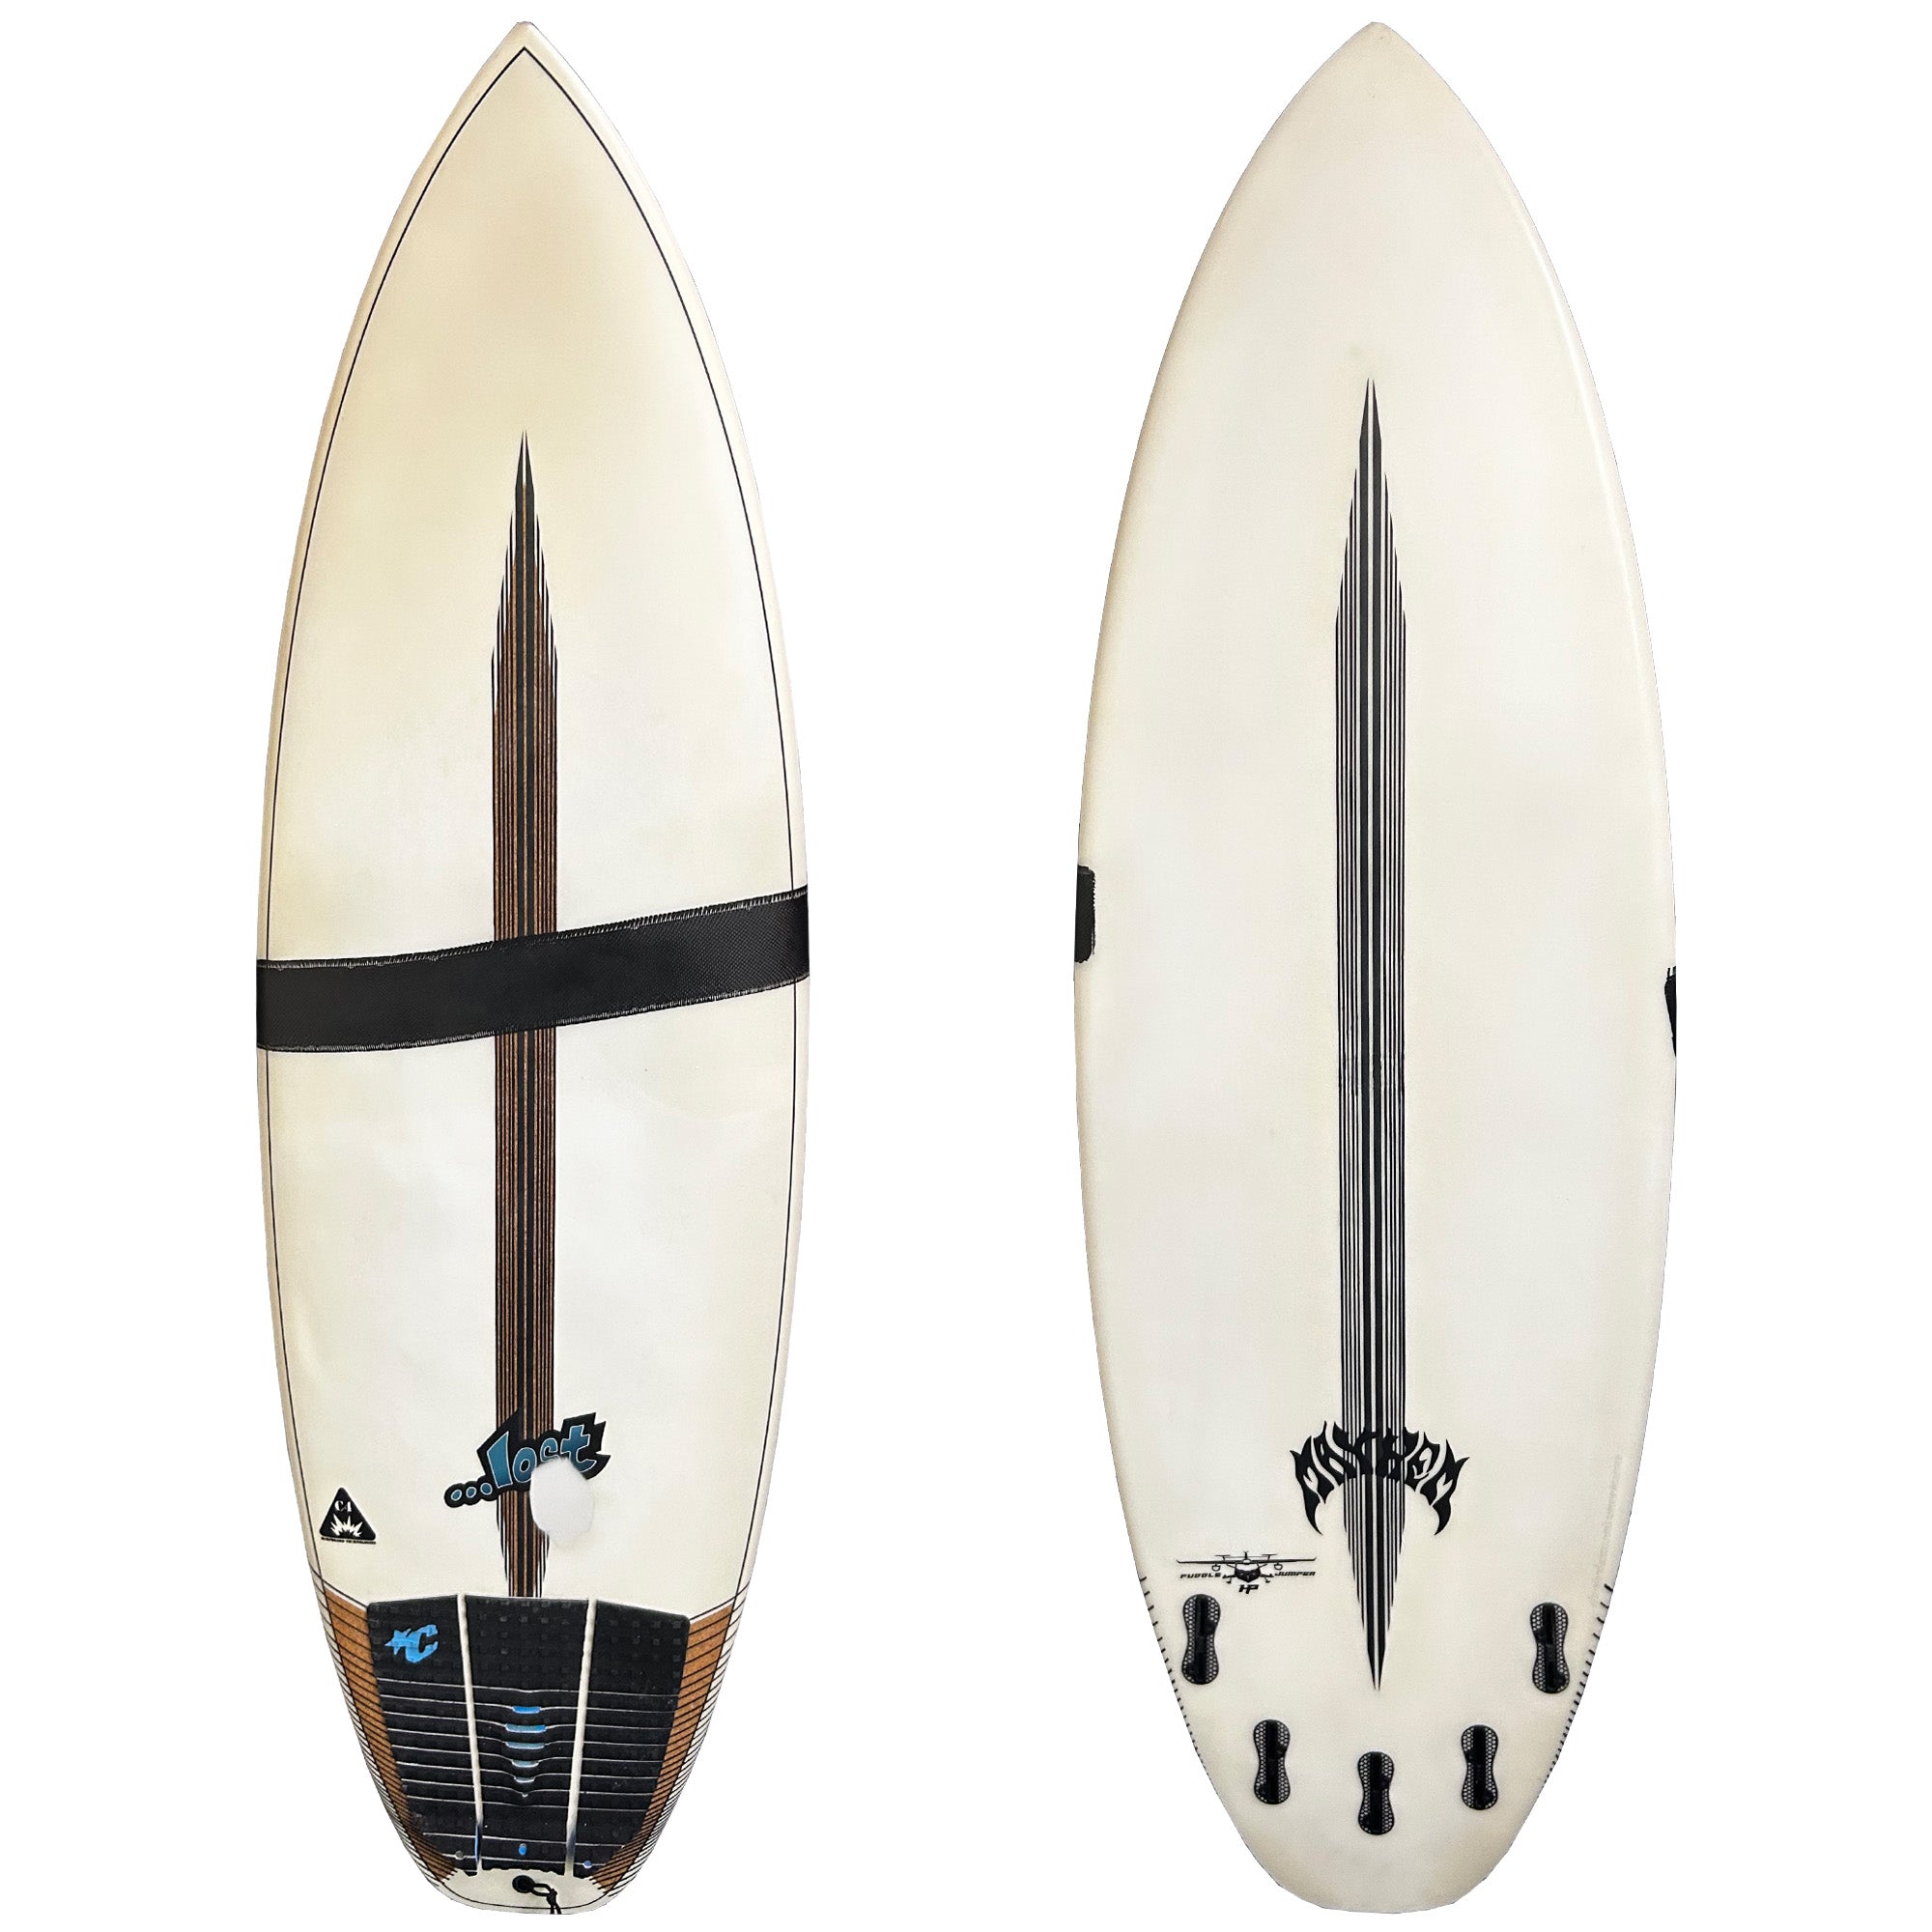 Lost Puddle Jumper HP 6'1 Consignment Surfboard